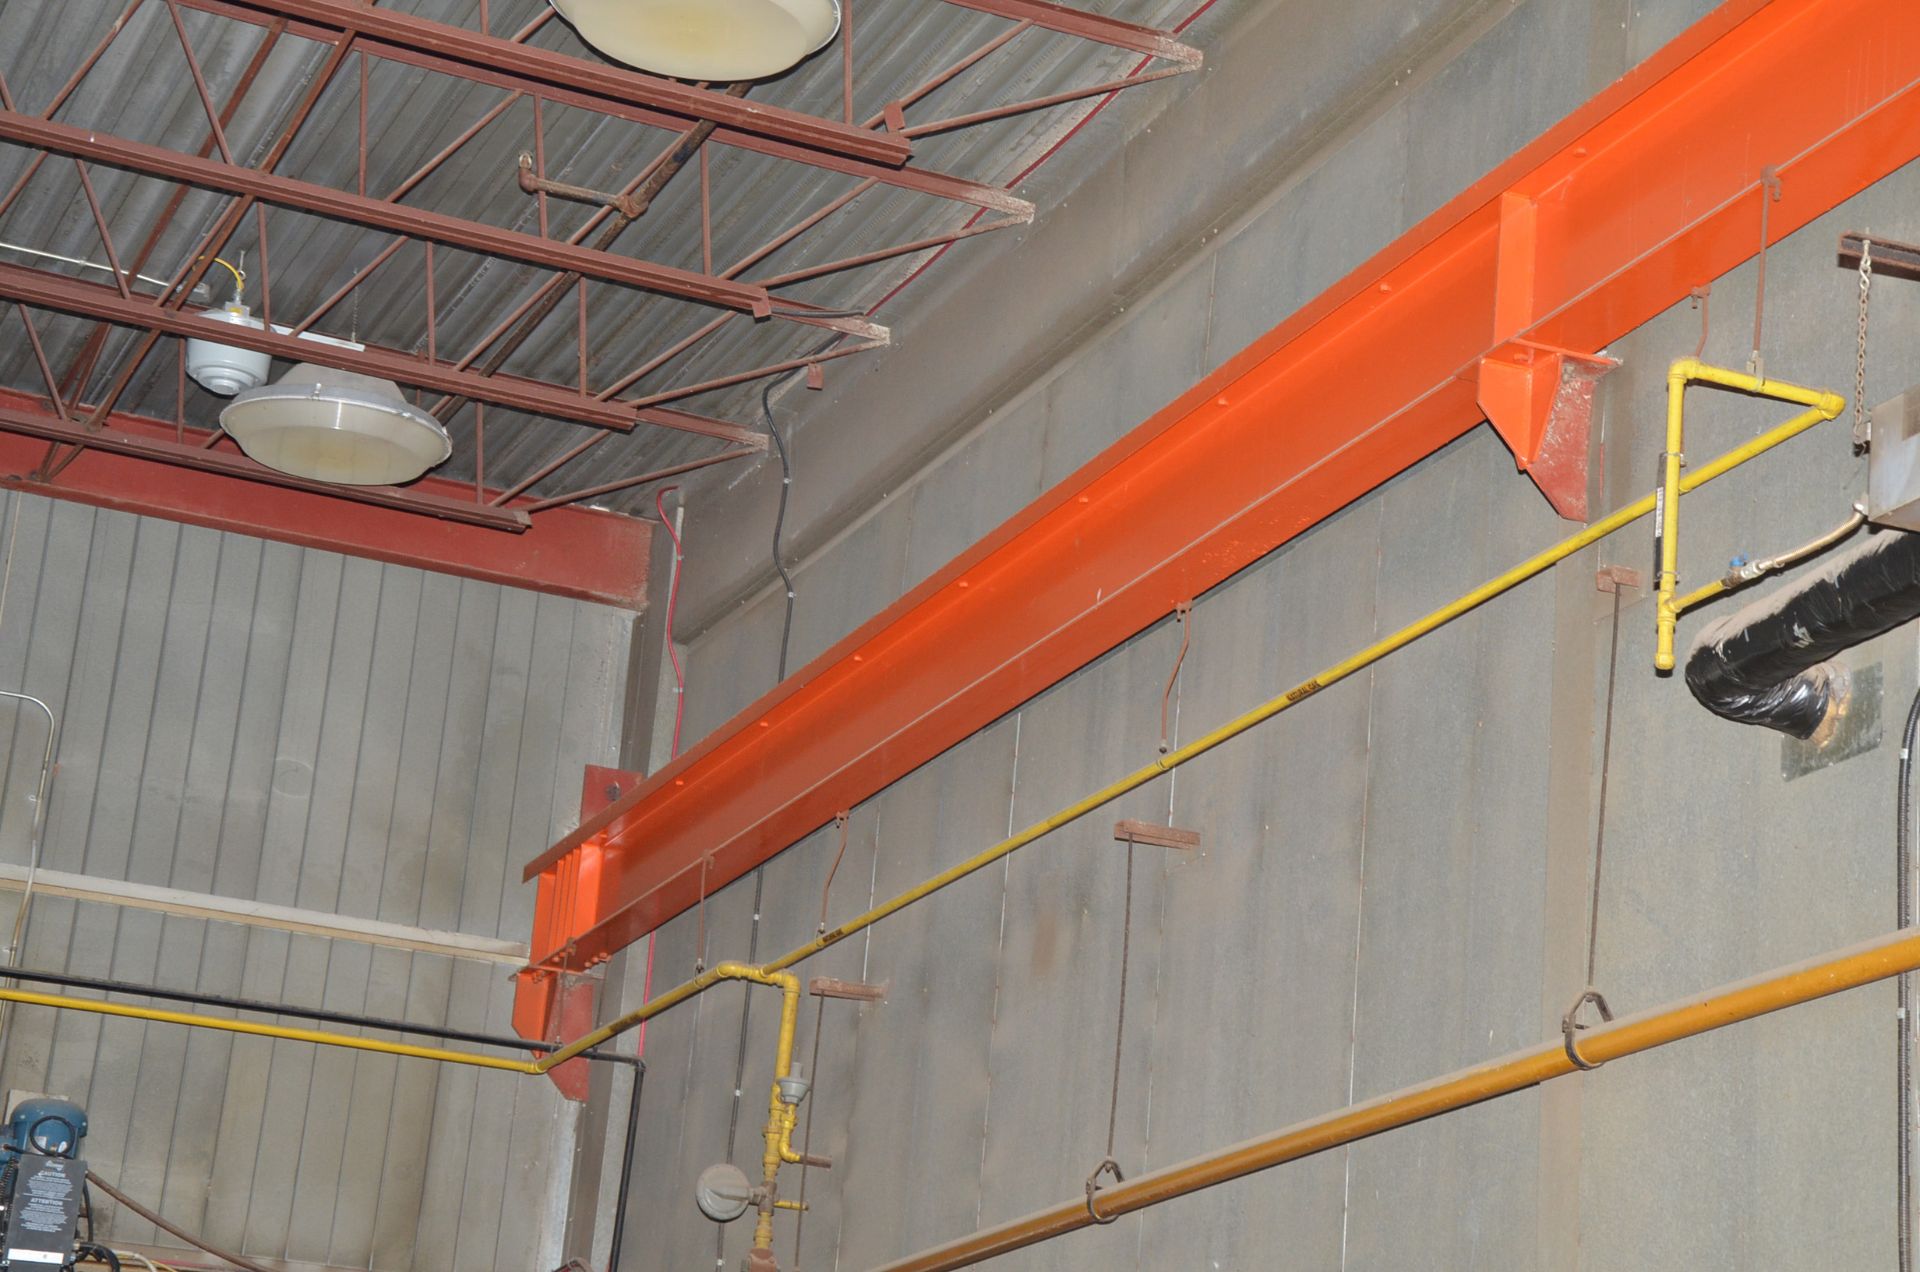 DEMAG 5TON CAPACITY TOP-RUNNING SINGLE-GIRDER OVERHEAD BRIDGE CRANE SYSTEM WITH 24' SPAN, 20' HEIGHT - Image 5 of 5